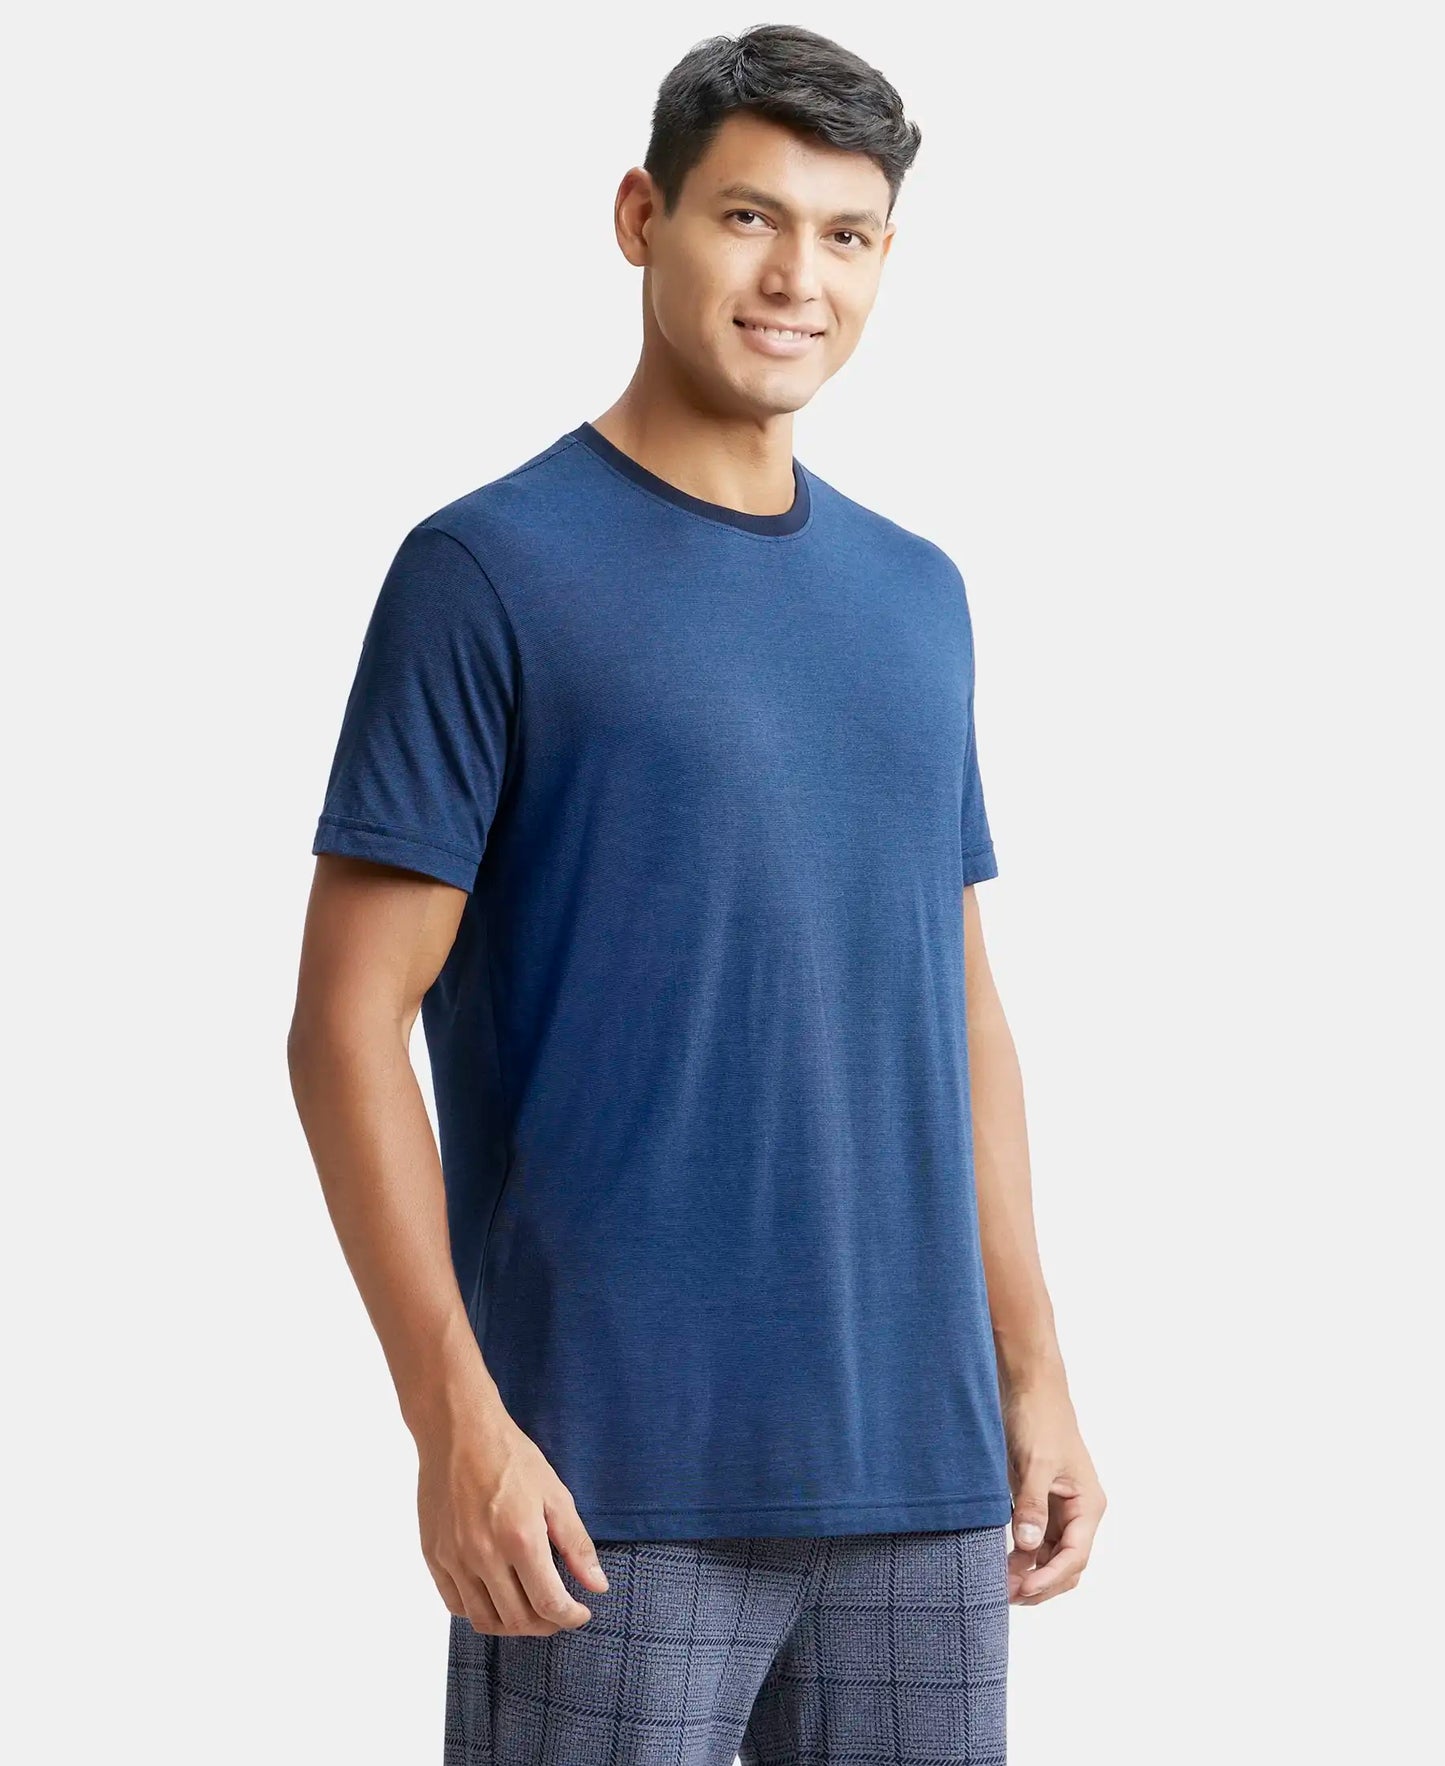 Tencel Micro Modal And Combed Cotton Blend Round Neck Half Sleeve T-Shirt - Navy & Ensign Blue-2